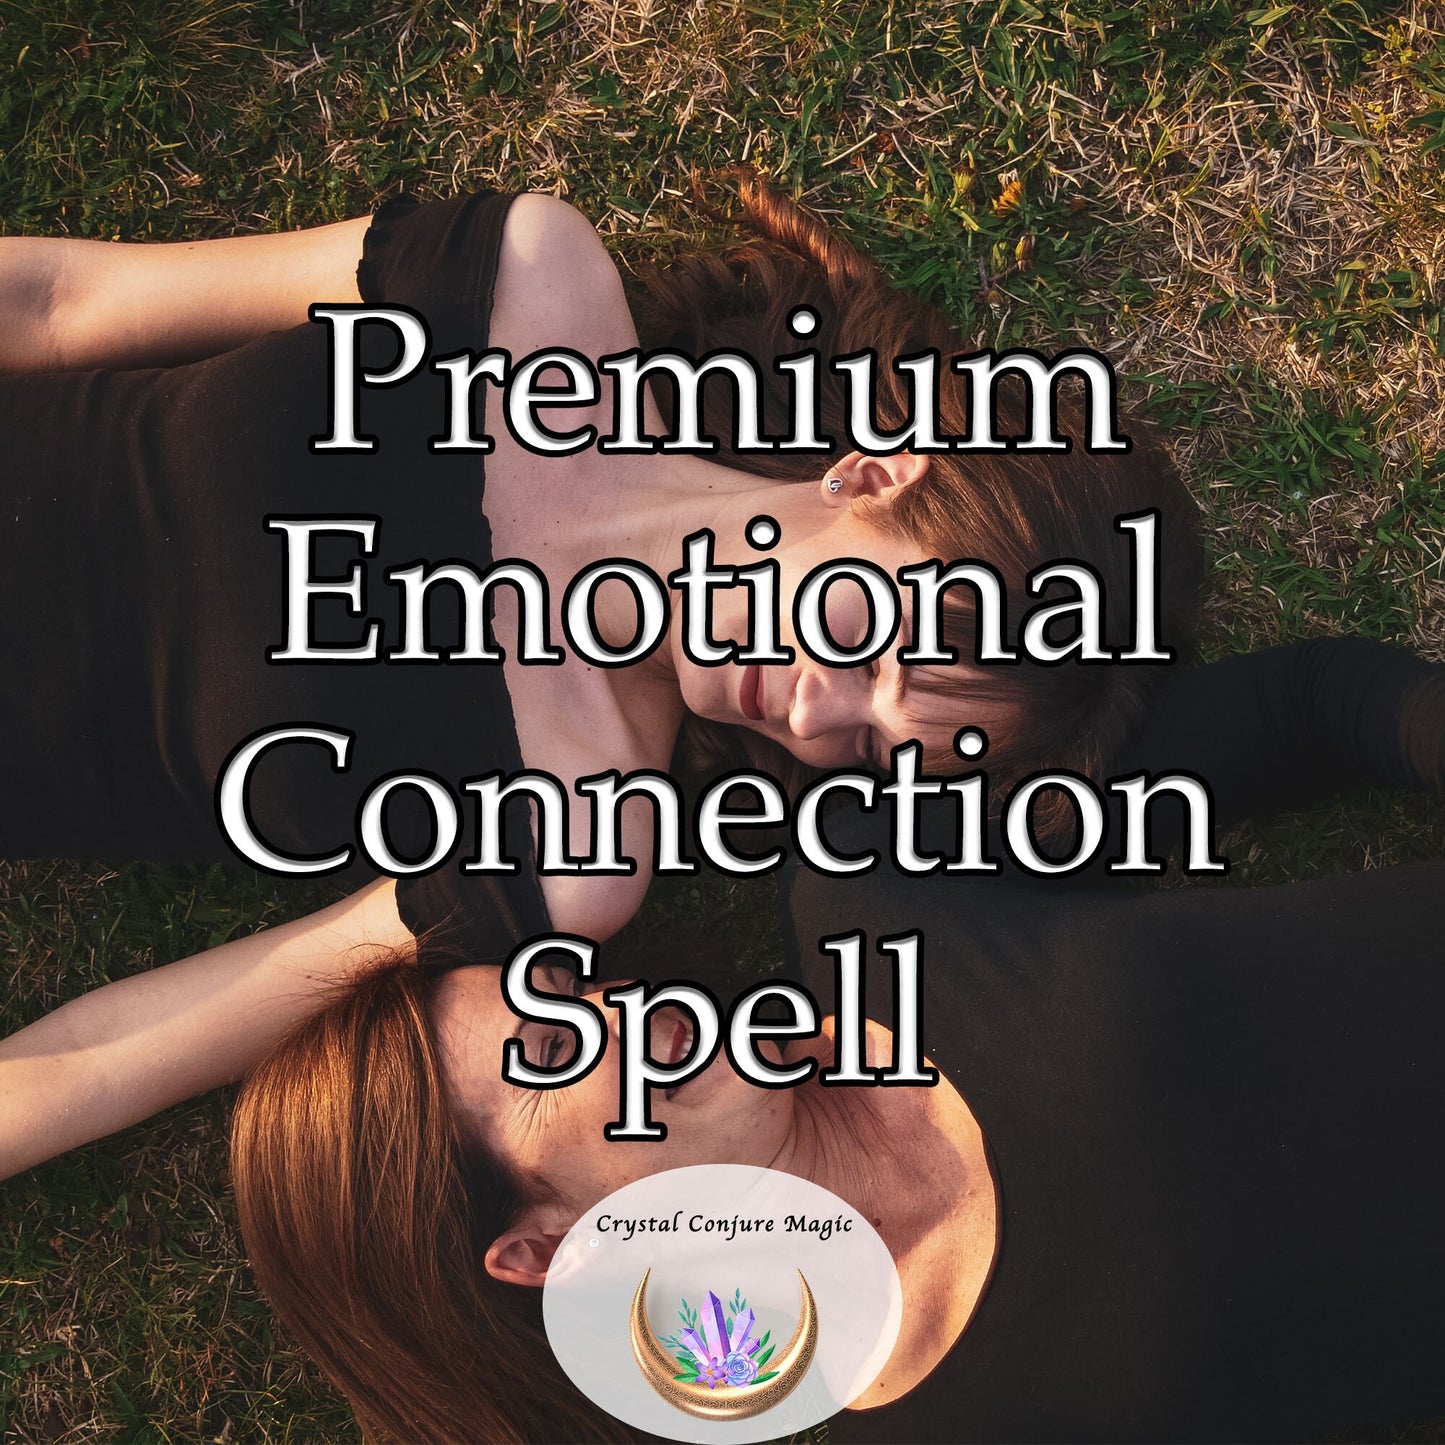 Premium Emotional Connection Spell - bridge the gap between souls, enabling you to connect with someone on a deep emotional level